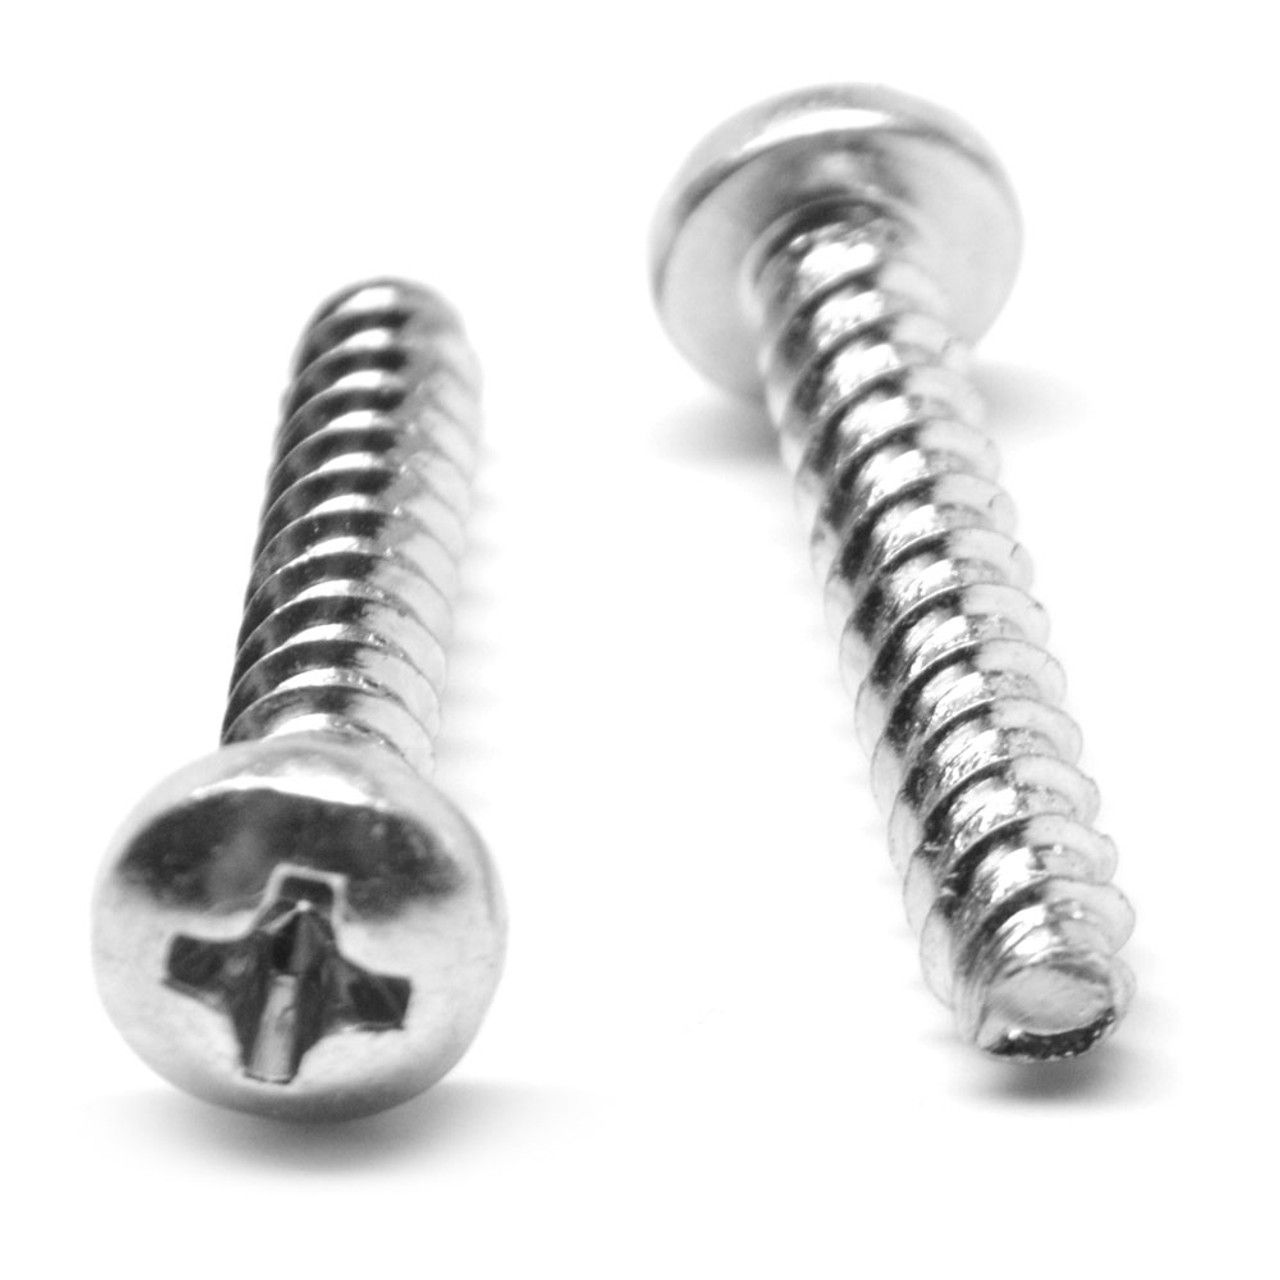 M2.2 x 0.98 x 6 MM EJOT PT-Alternative Phillips Pan Head Thread Forming Screw Stainless Steel 18-8